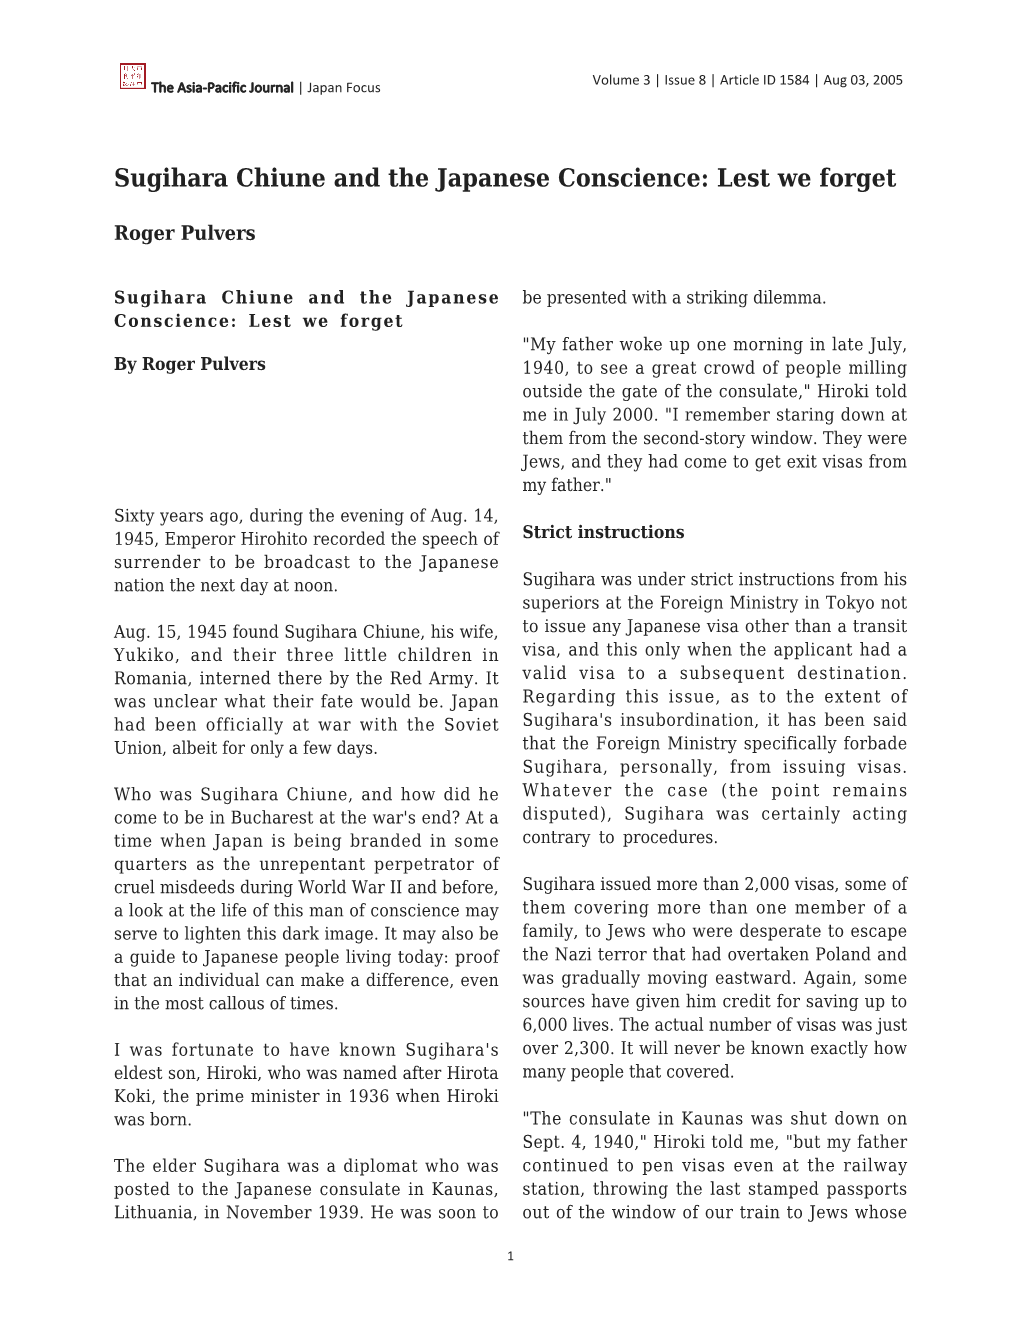 Sugihara Chiune and the Japanese Conscience: Lest We Forget